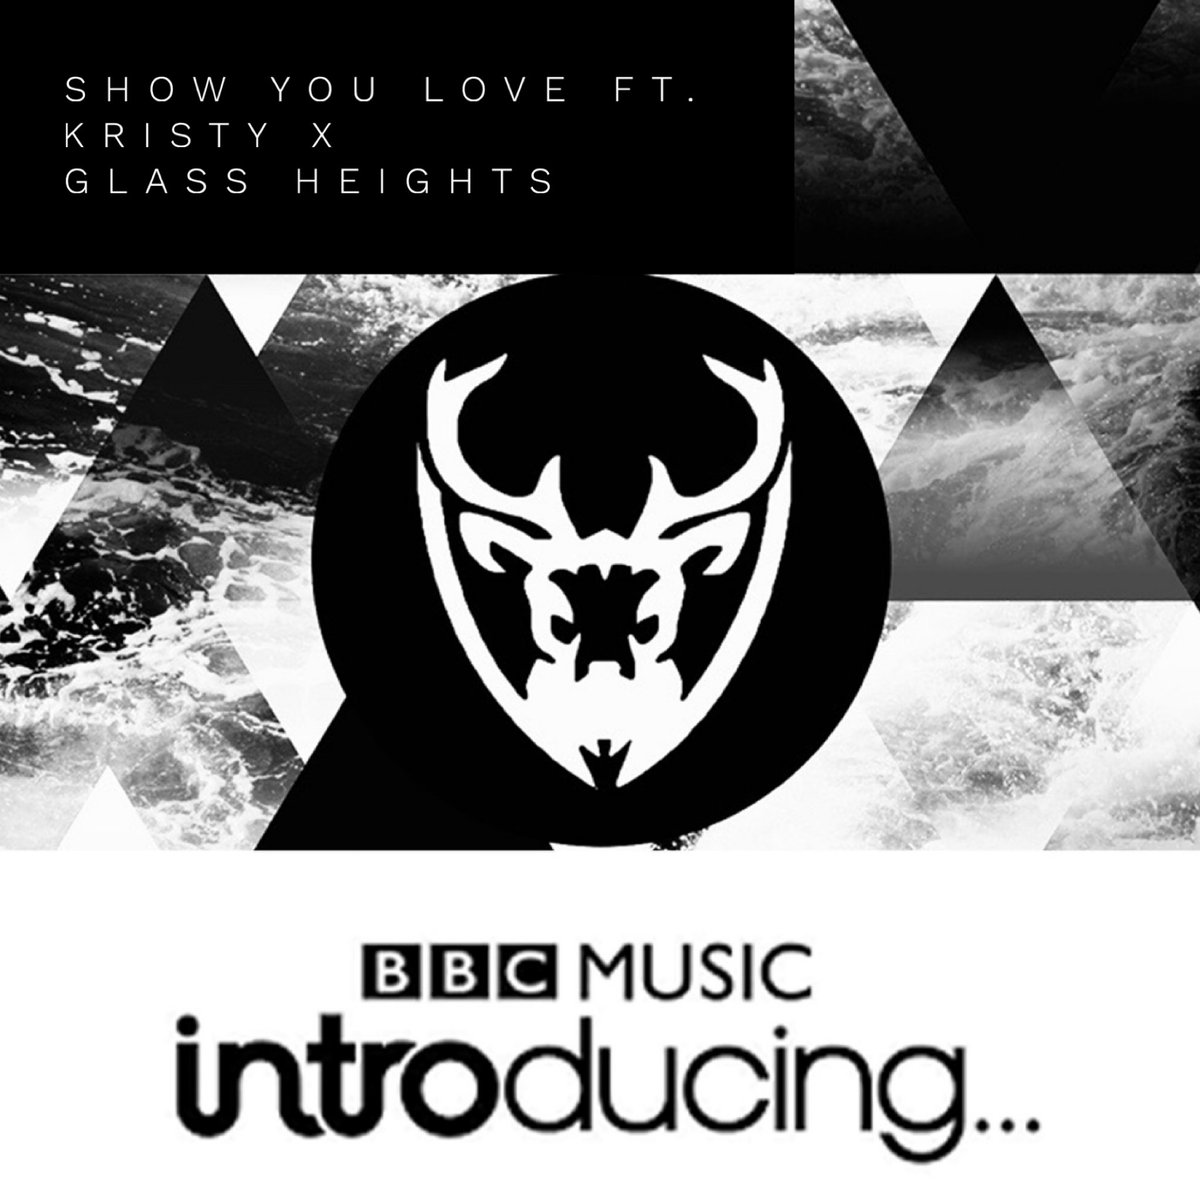 First debut spin on SYL ft. Kristy X & myself !! @glass_heights Listen in with me on Wednesday 8-10pm on BBC Sussex & Surrey #musicproducer #electronicmusic #artist